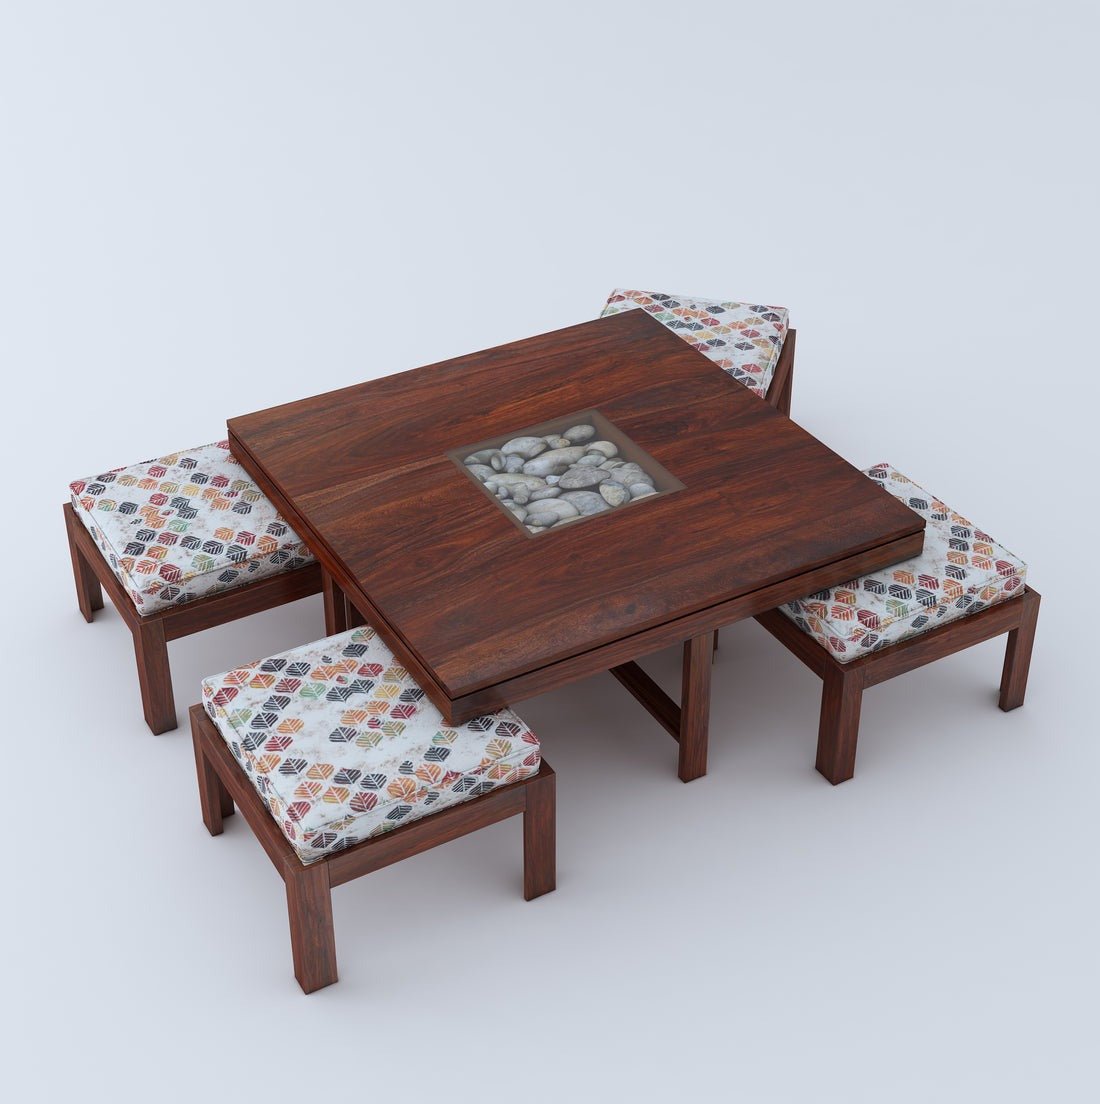 Anzio Solid Wood Coffee Table Centre Table With 4 Seating Stool For Living Room. - Torque India